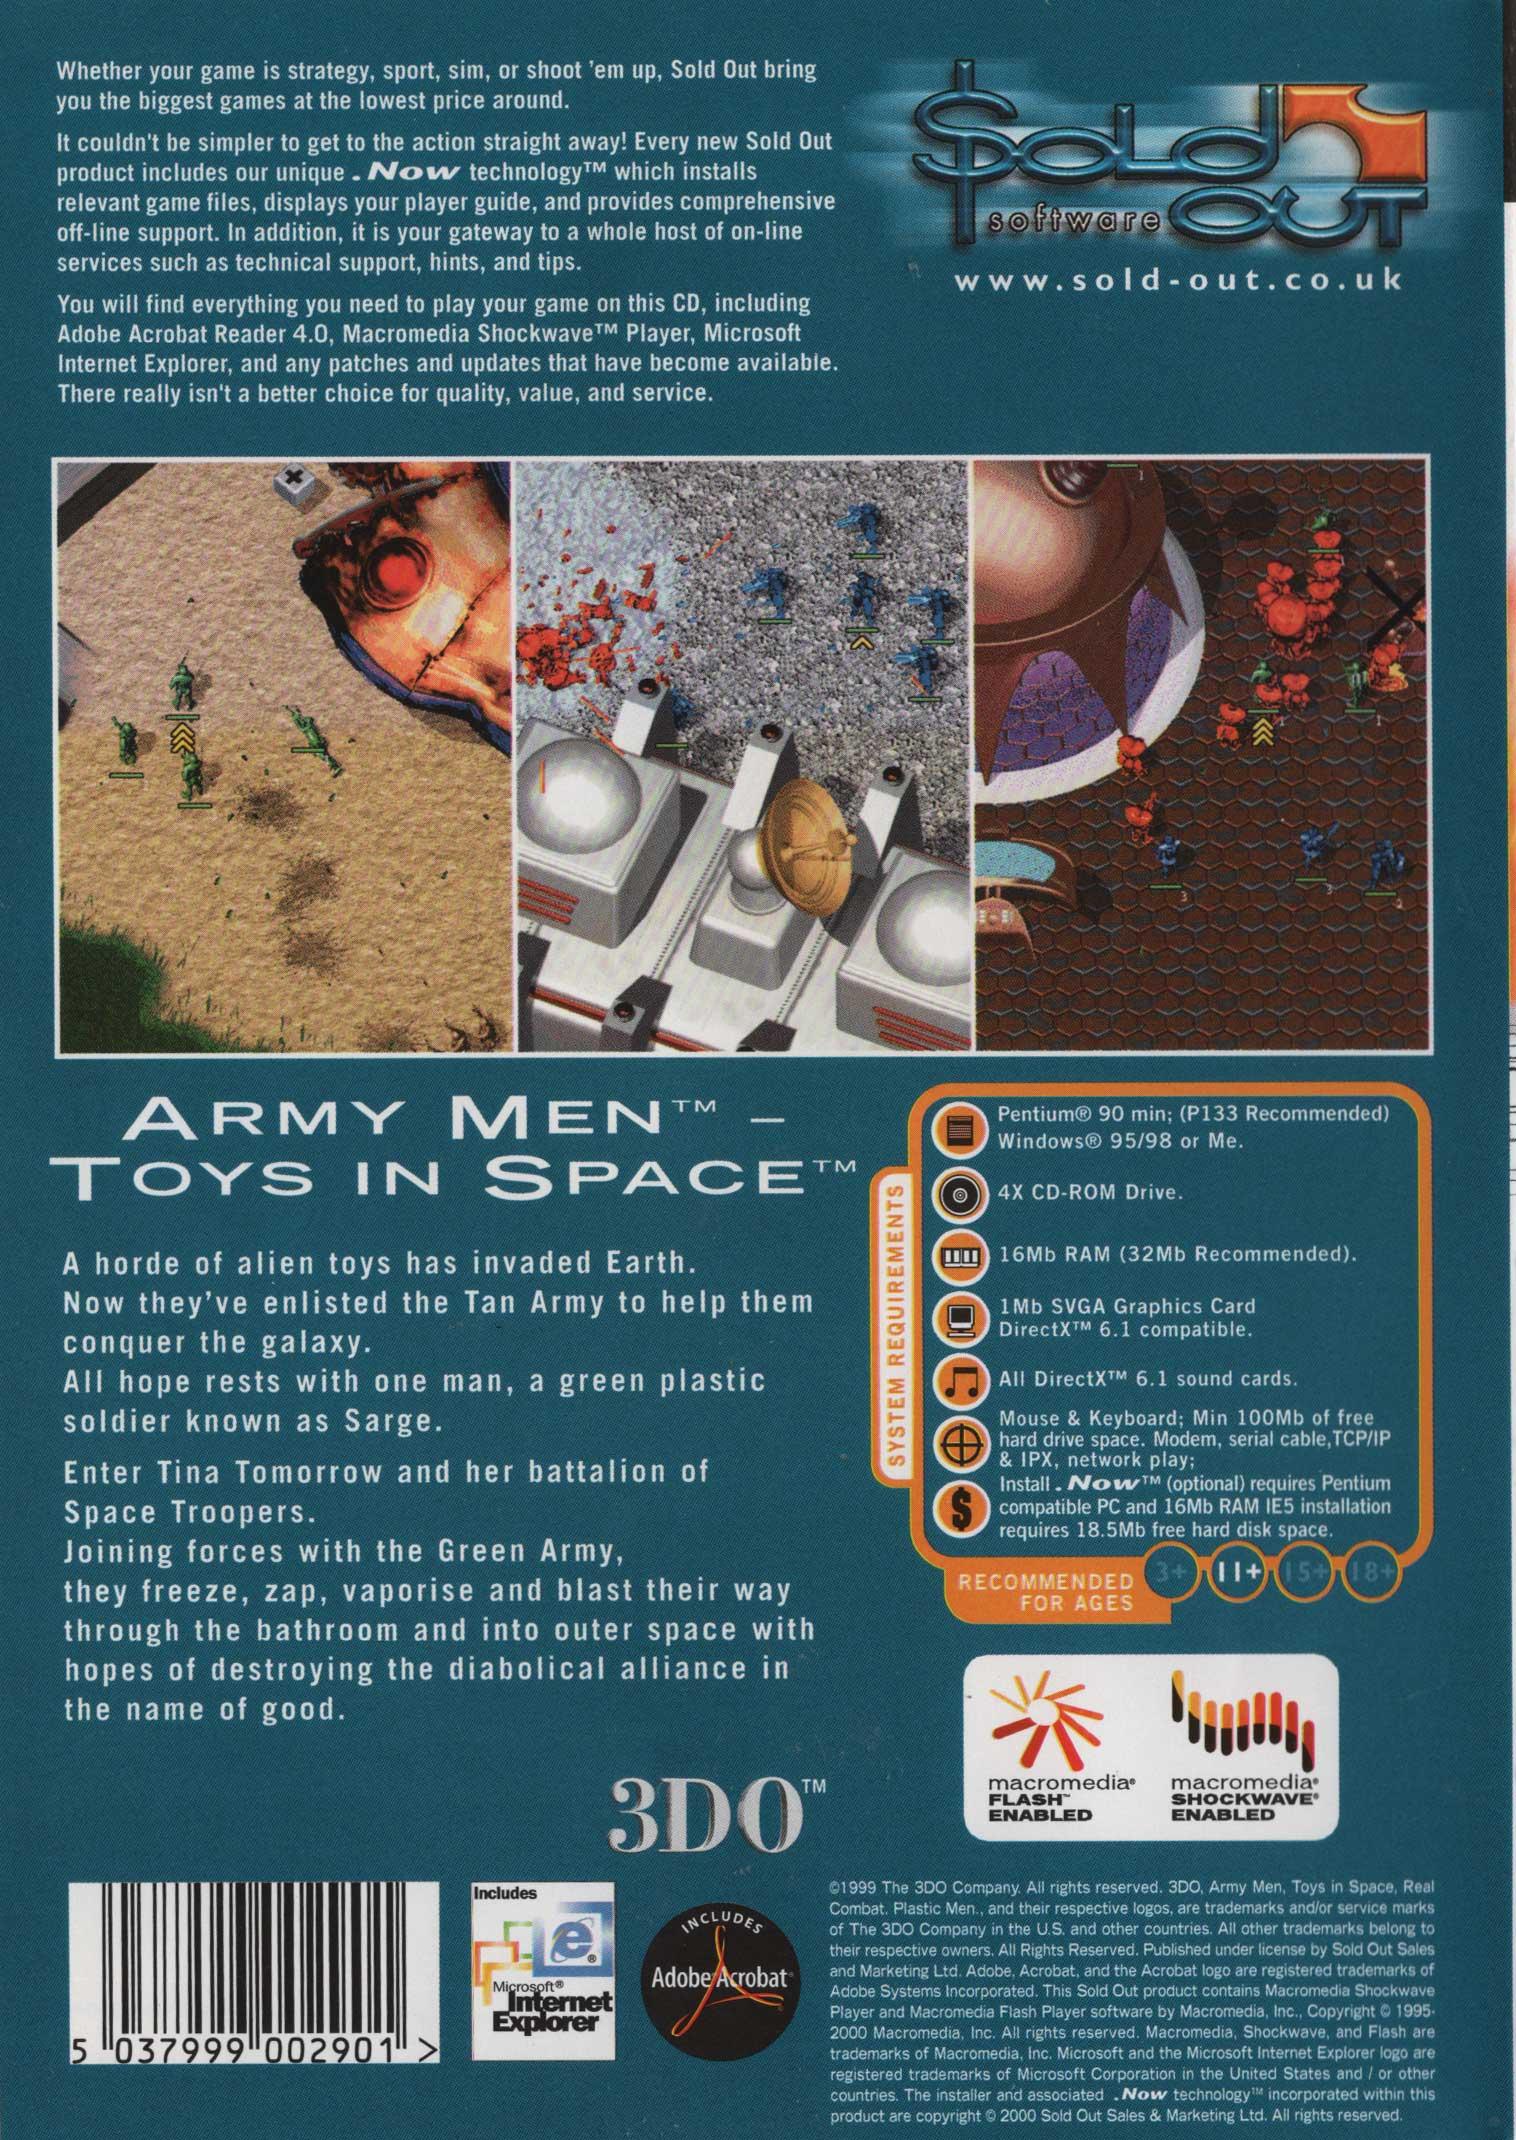 Army Men Toys In Space - Classic Windows PC Game